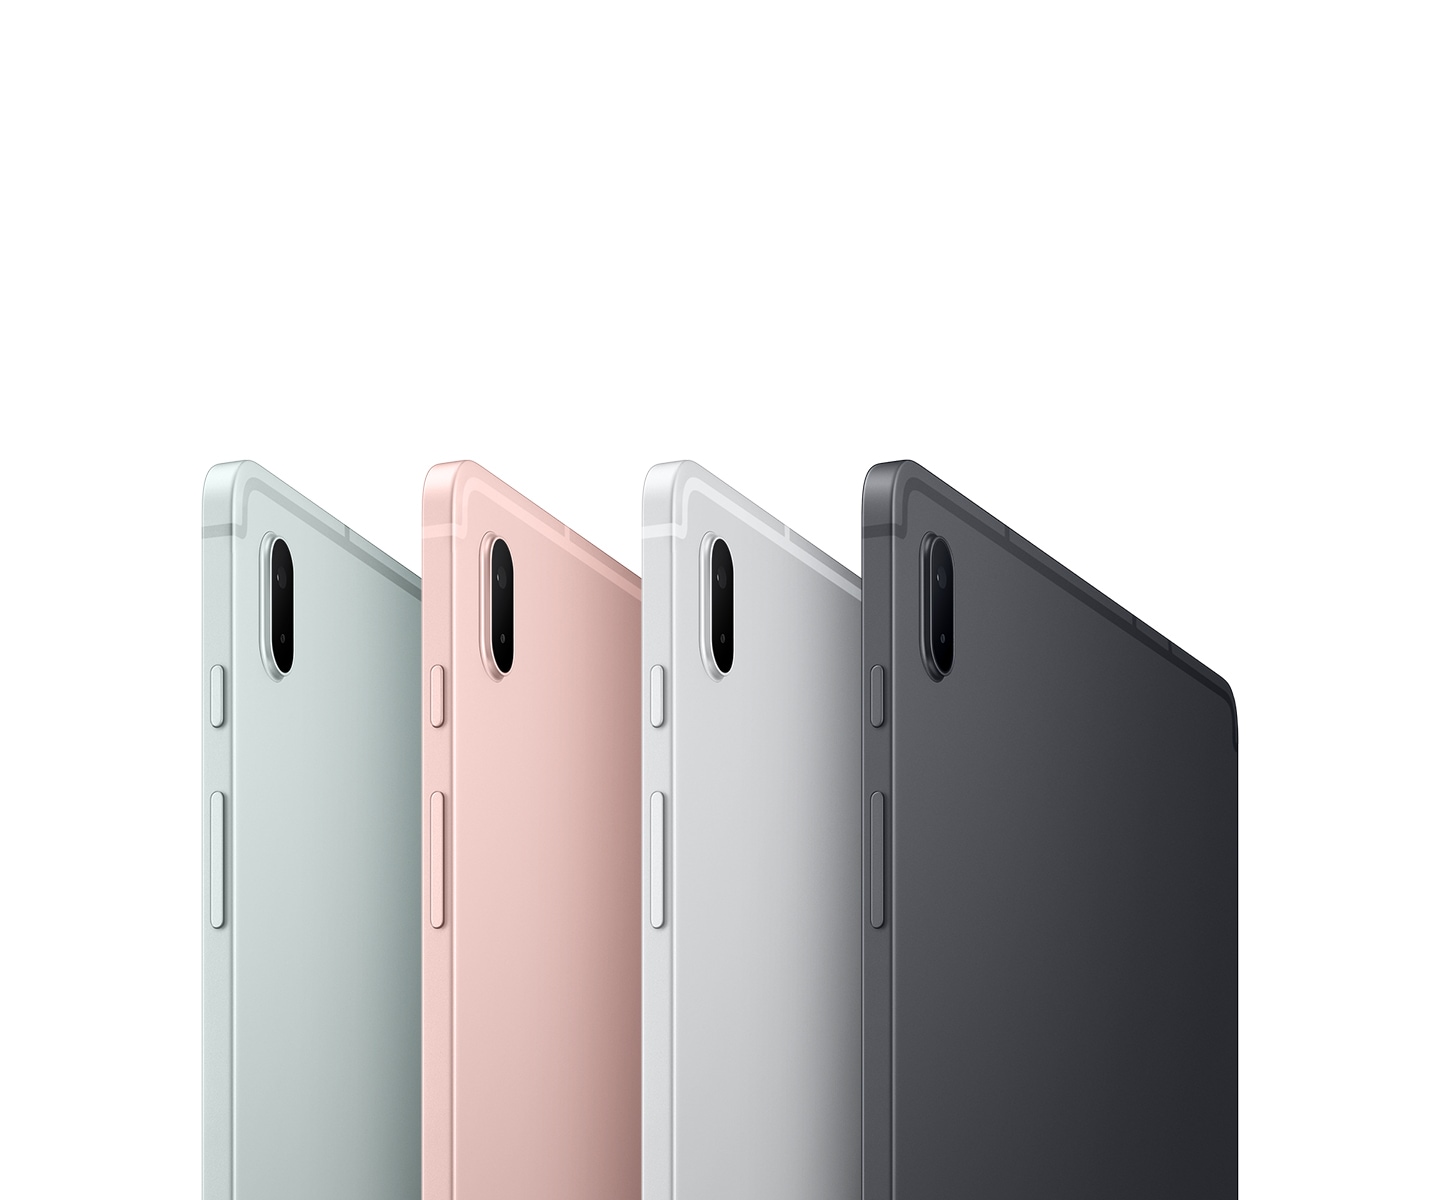 Four Galaxy Tab S7 FE 5G tablets, all seen from the rear at an angle to show the colors: Mystic Green, Mystic Pink, Mystic Silver and Mystic Black.